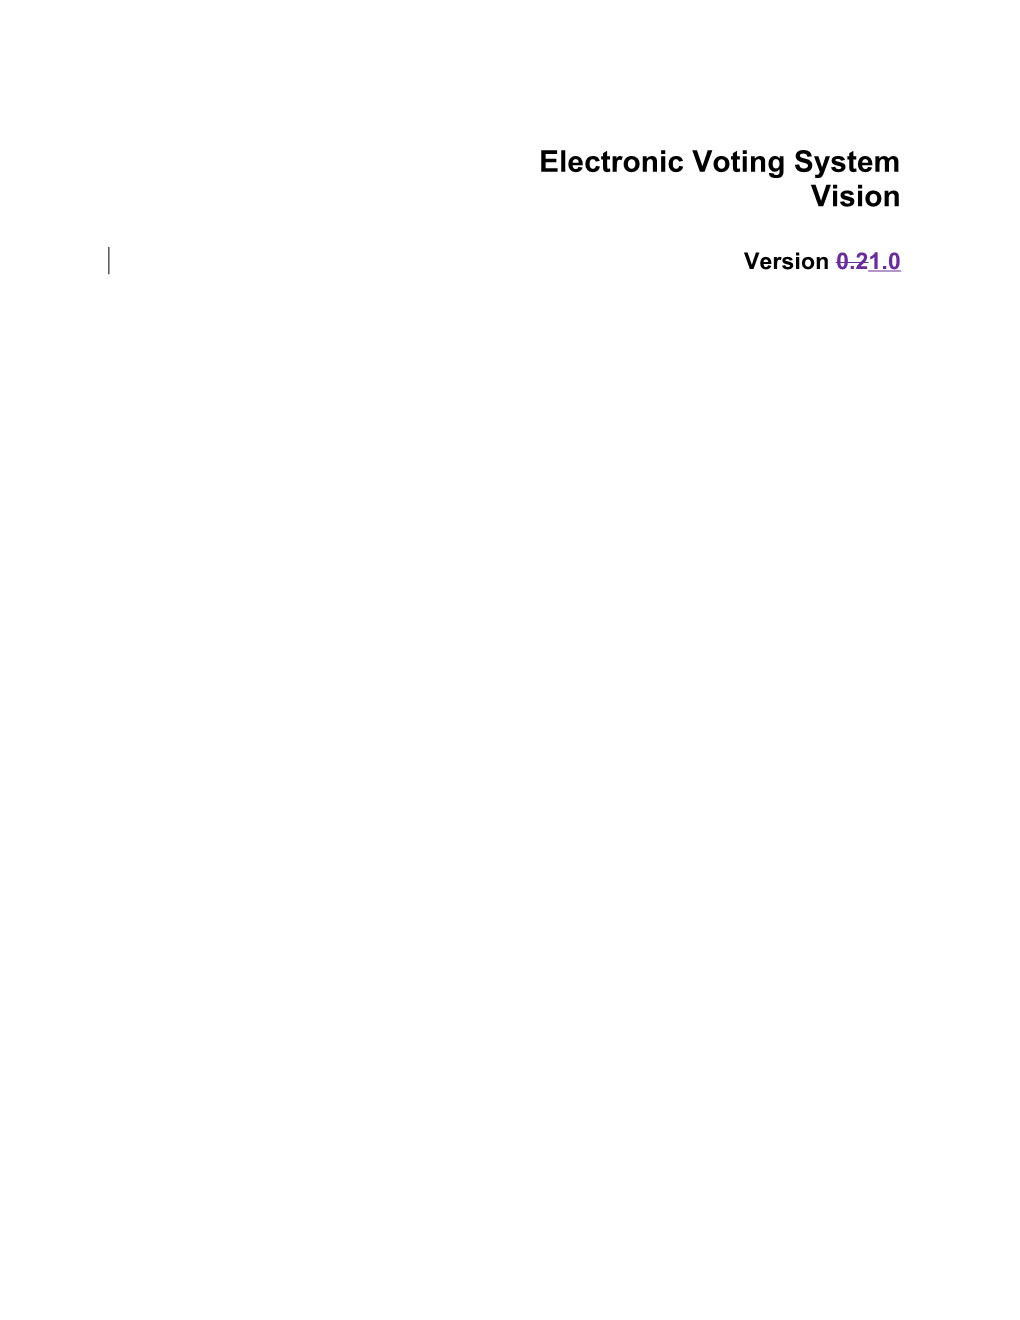 Electronic Voting System s1